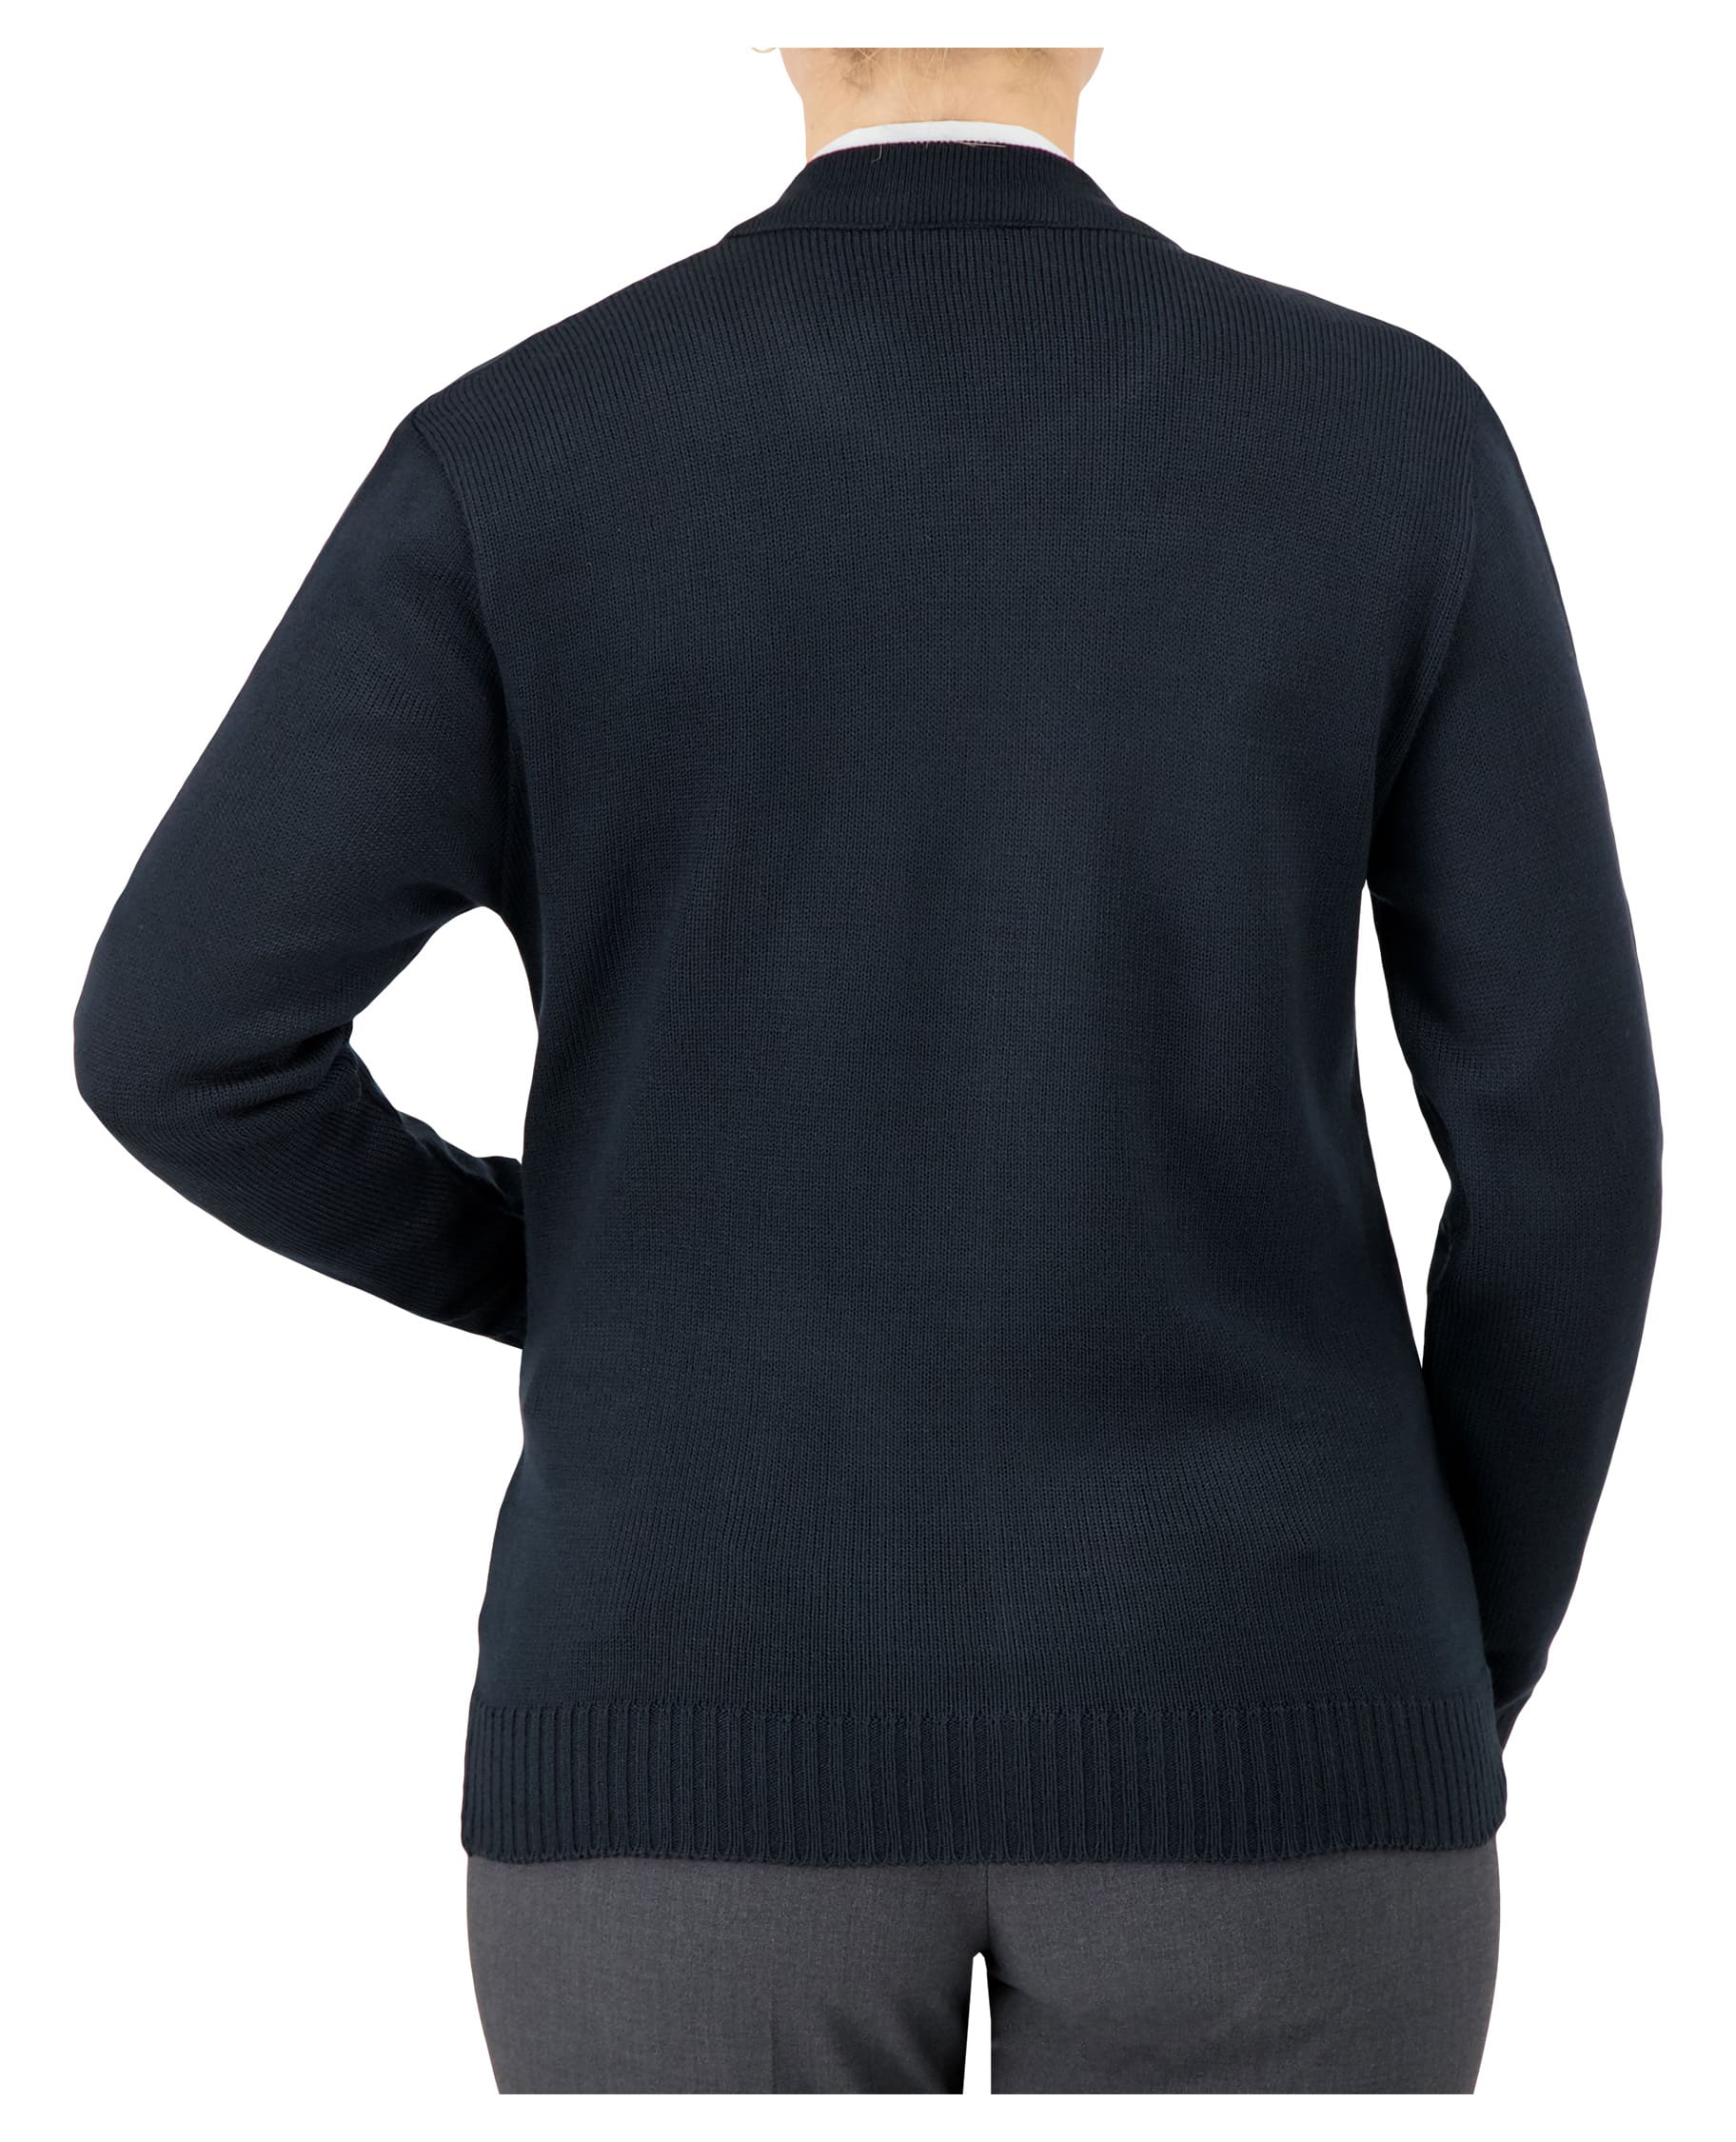 back of navy v-neck zip up sweater with pockets